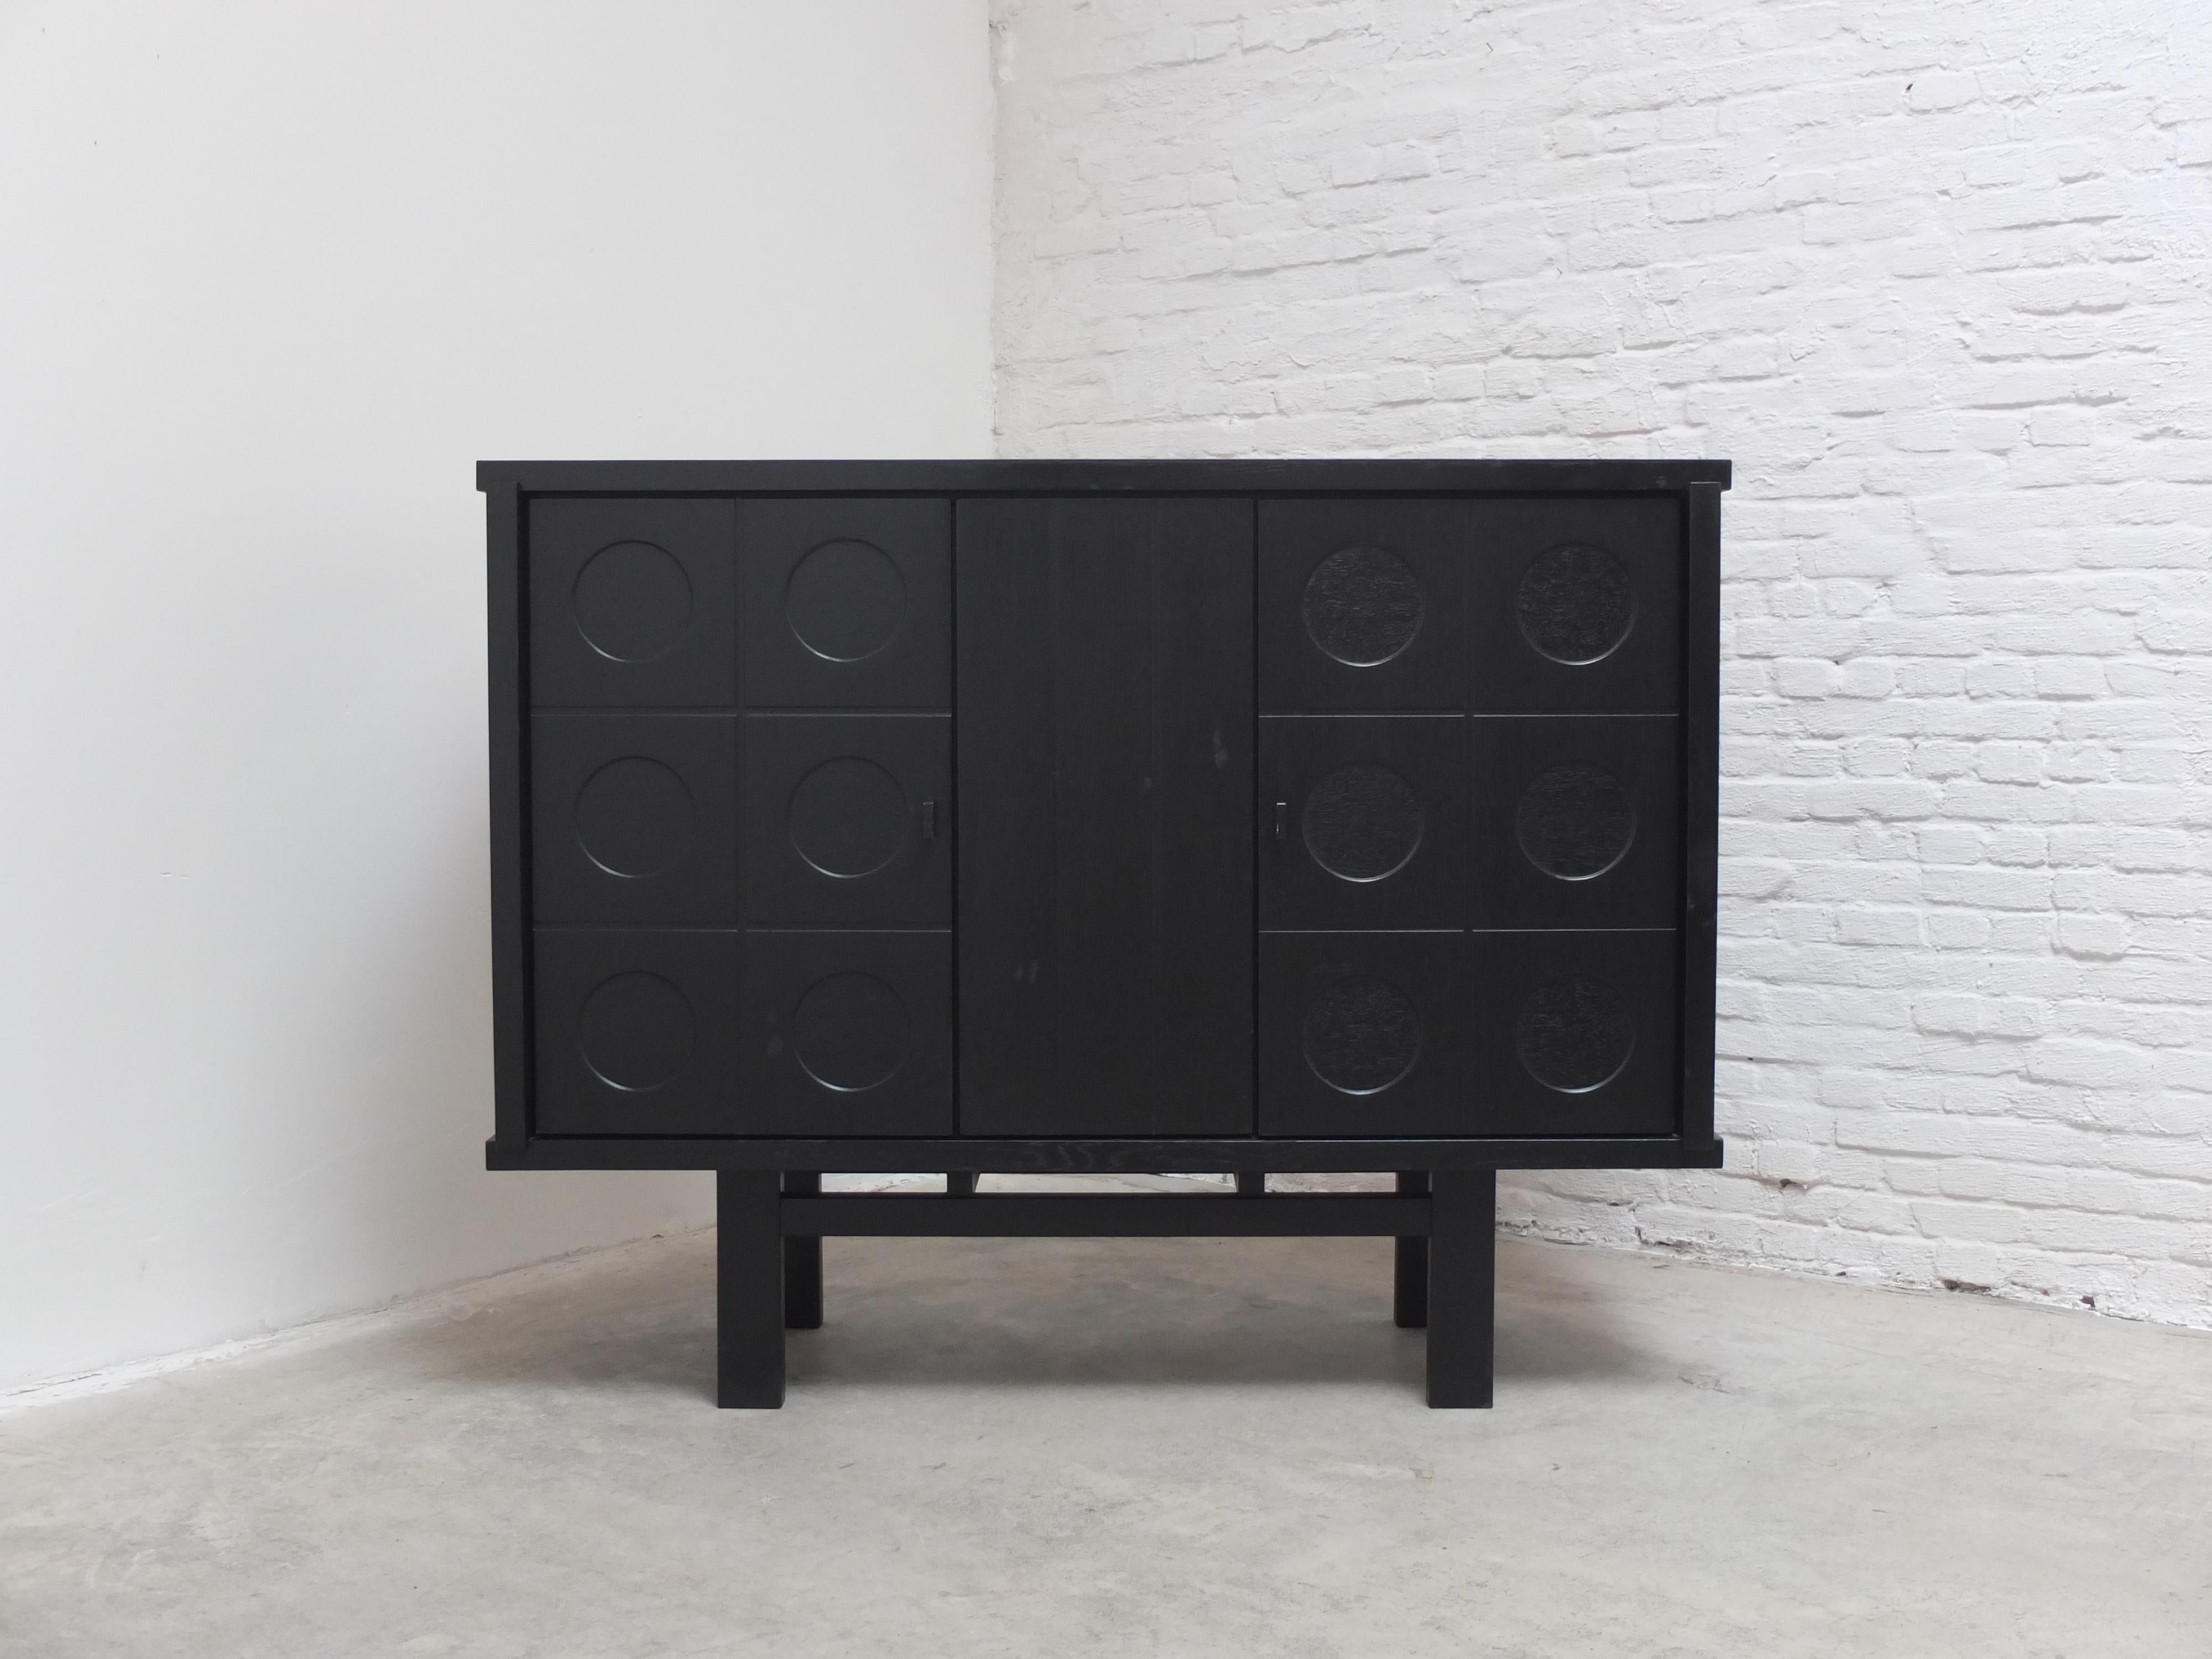 A stunning graphical cabinet in black stained oak produced in Belgium during the 1970s. Often attributed to Belgian manufacturer ‘De Coene’. The beautiful geometric patterns on the doors give this cabinet a strong and decorative expression. In very